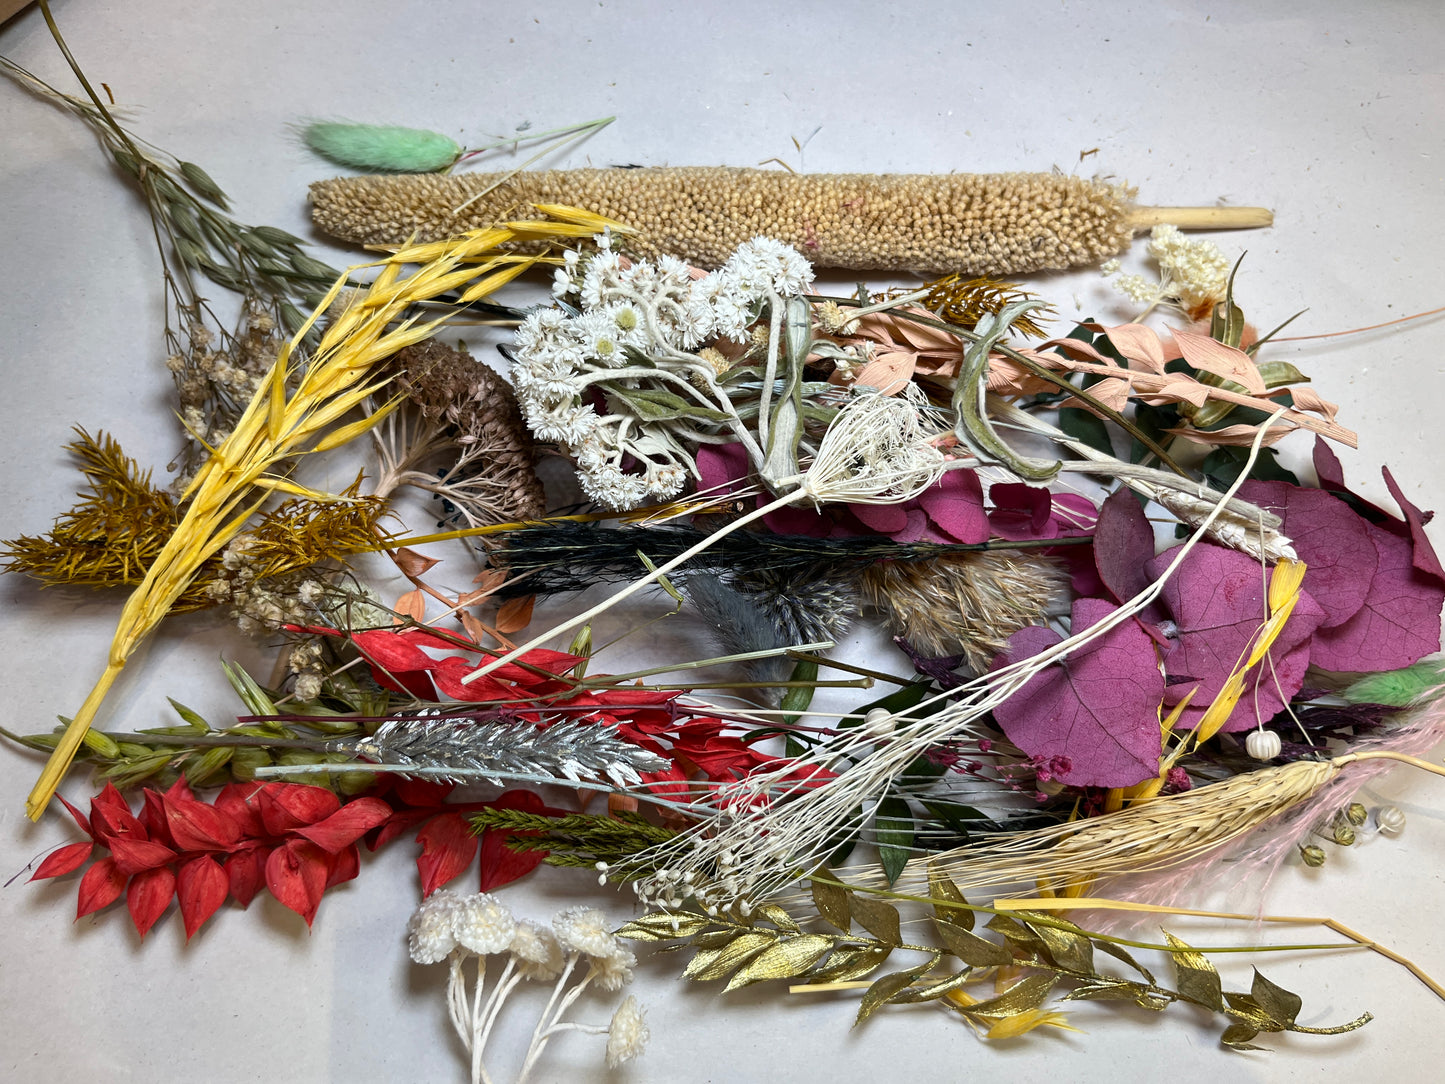 Offcut Dried Flowers